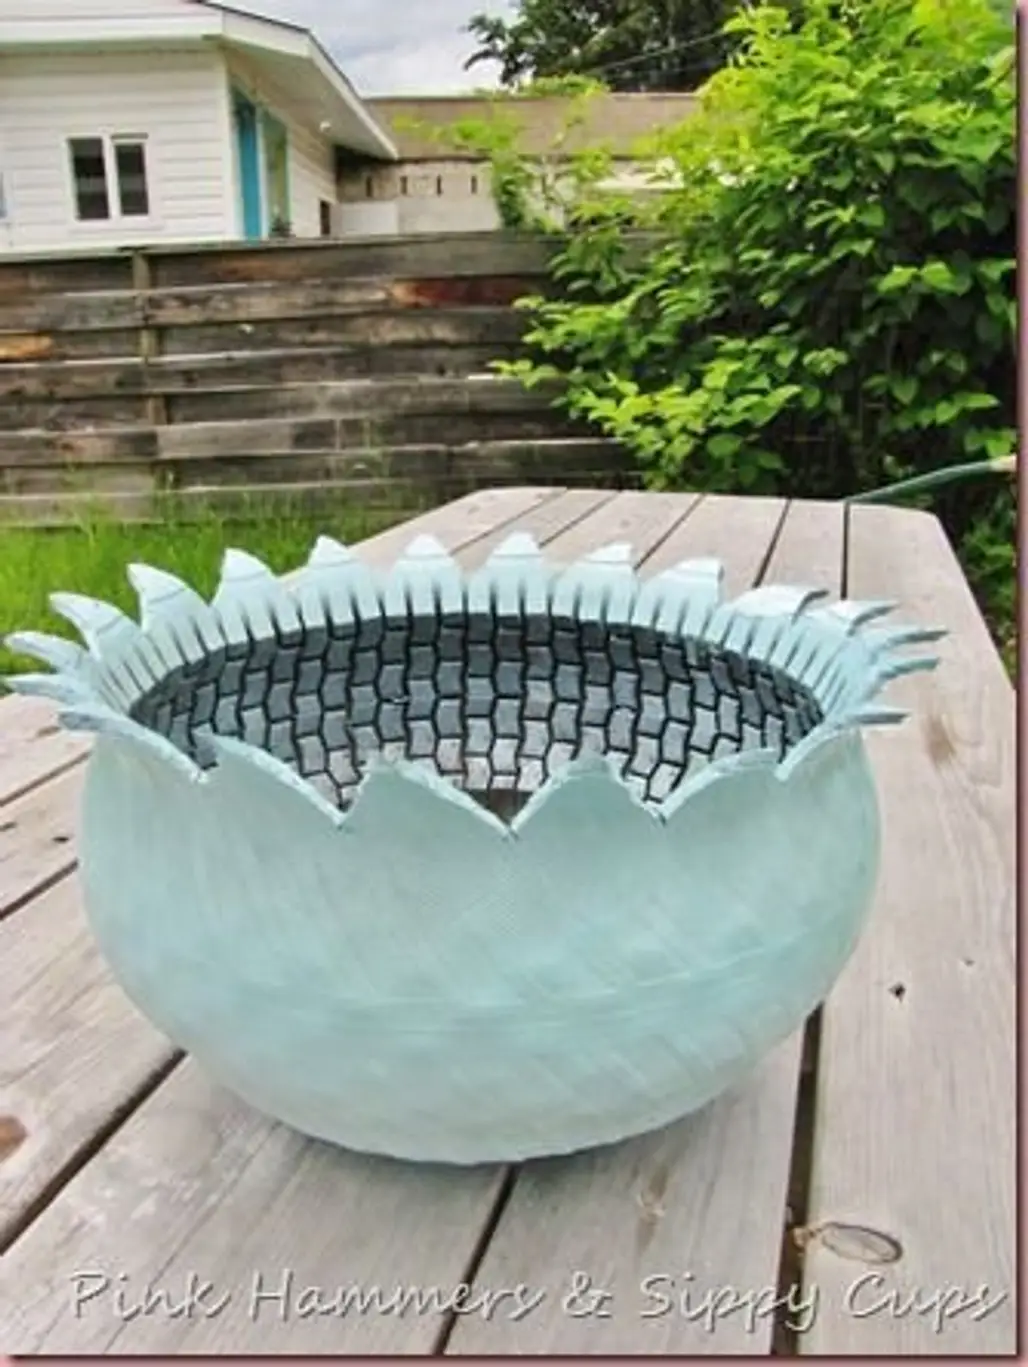 Turn It inside out to Make a Planter